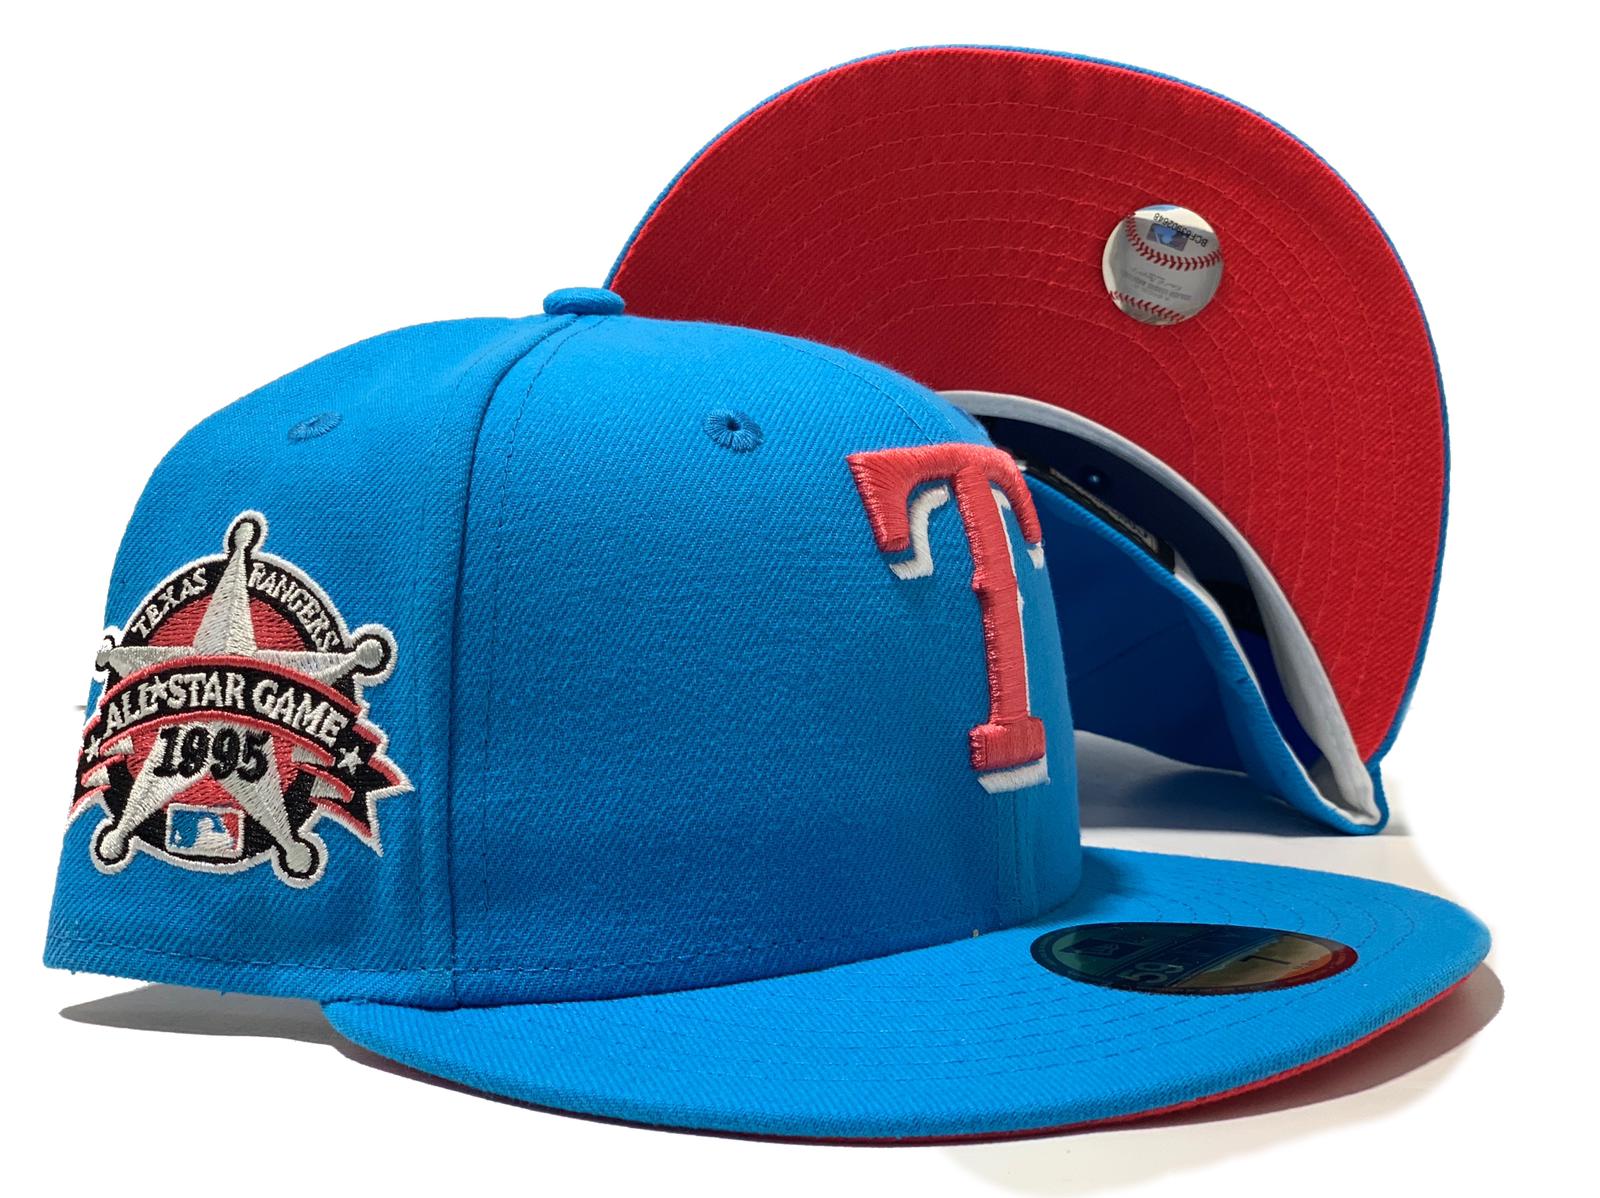 Texas Rangers 1995 All Star Game New Era 59FIFTY Fitted Hat (Navy, Metallic Gold, Gray Under BRIM) 7 3/8